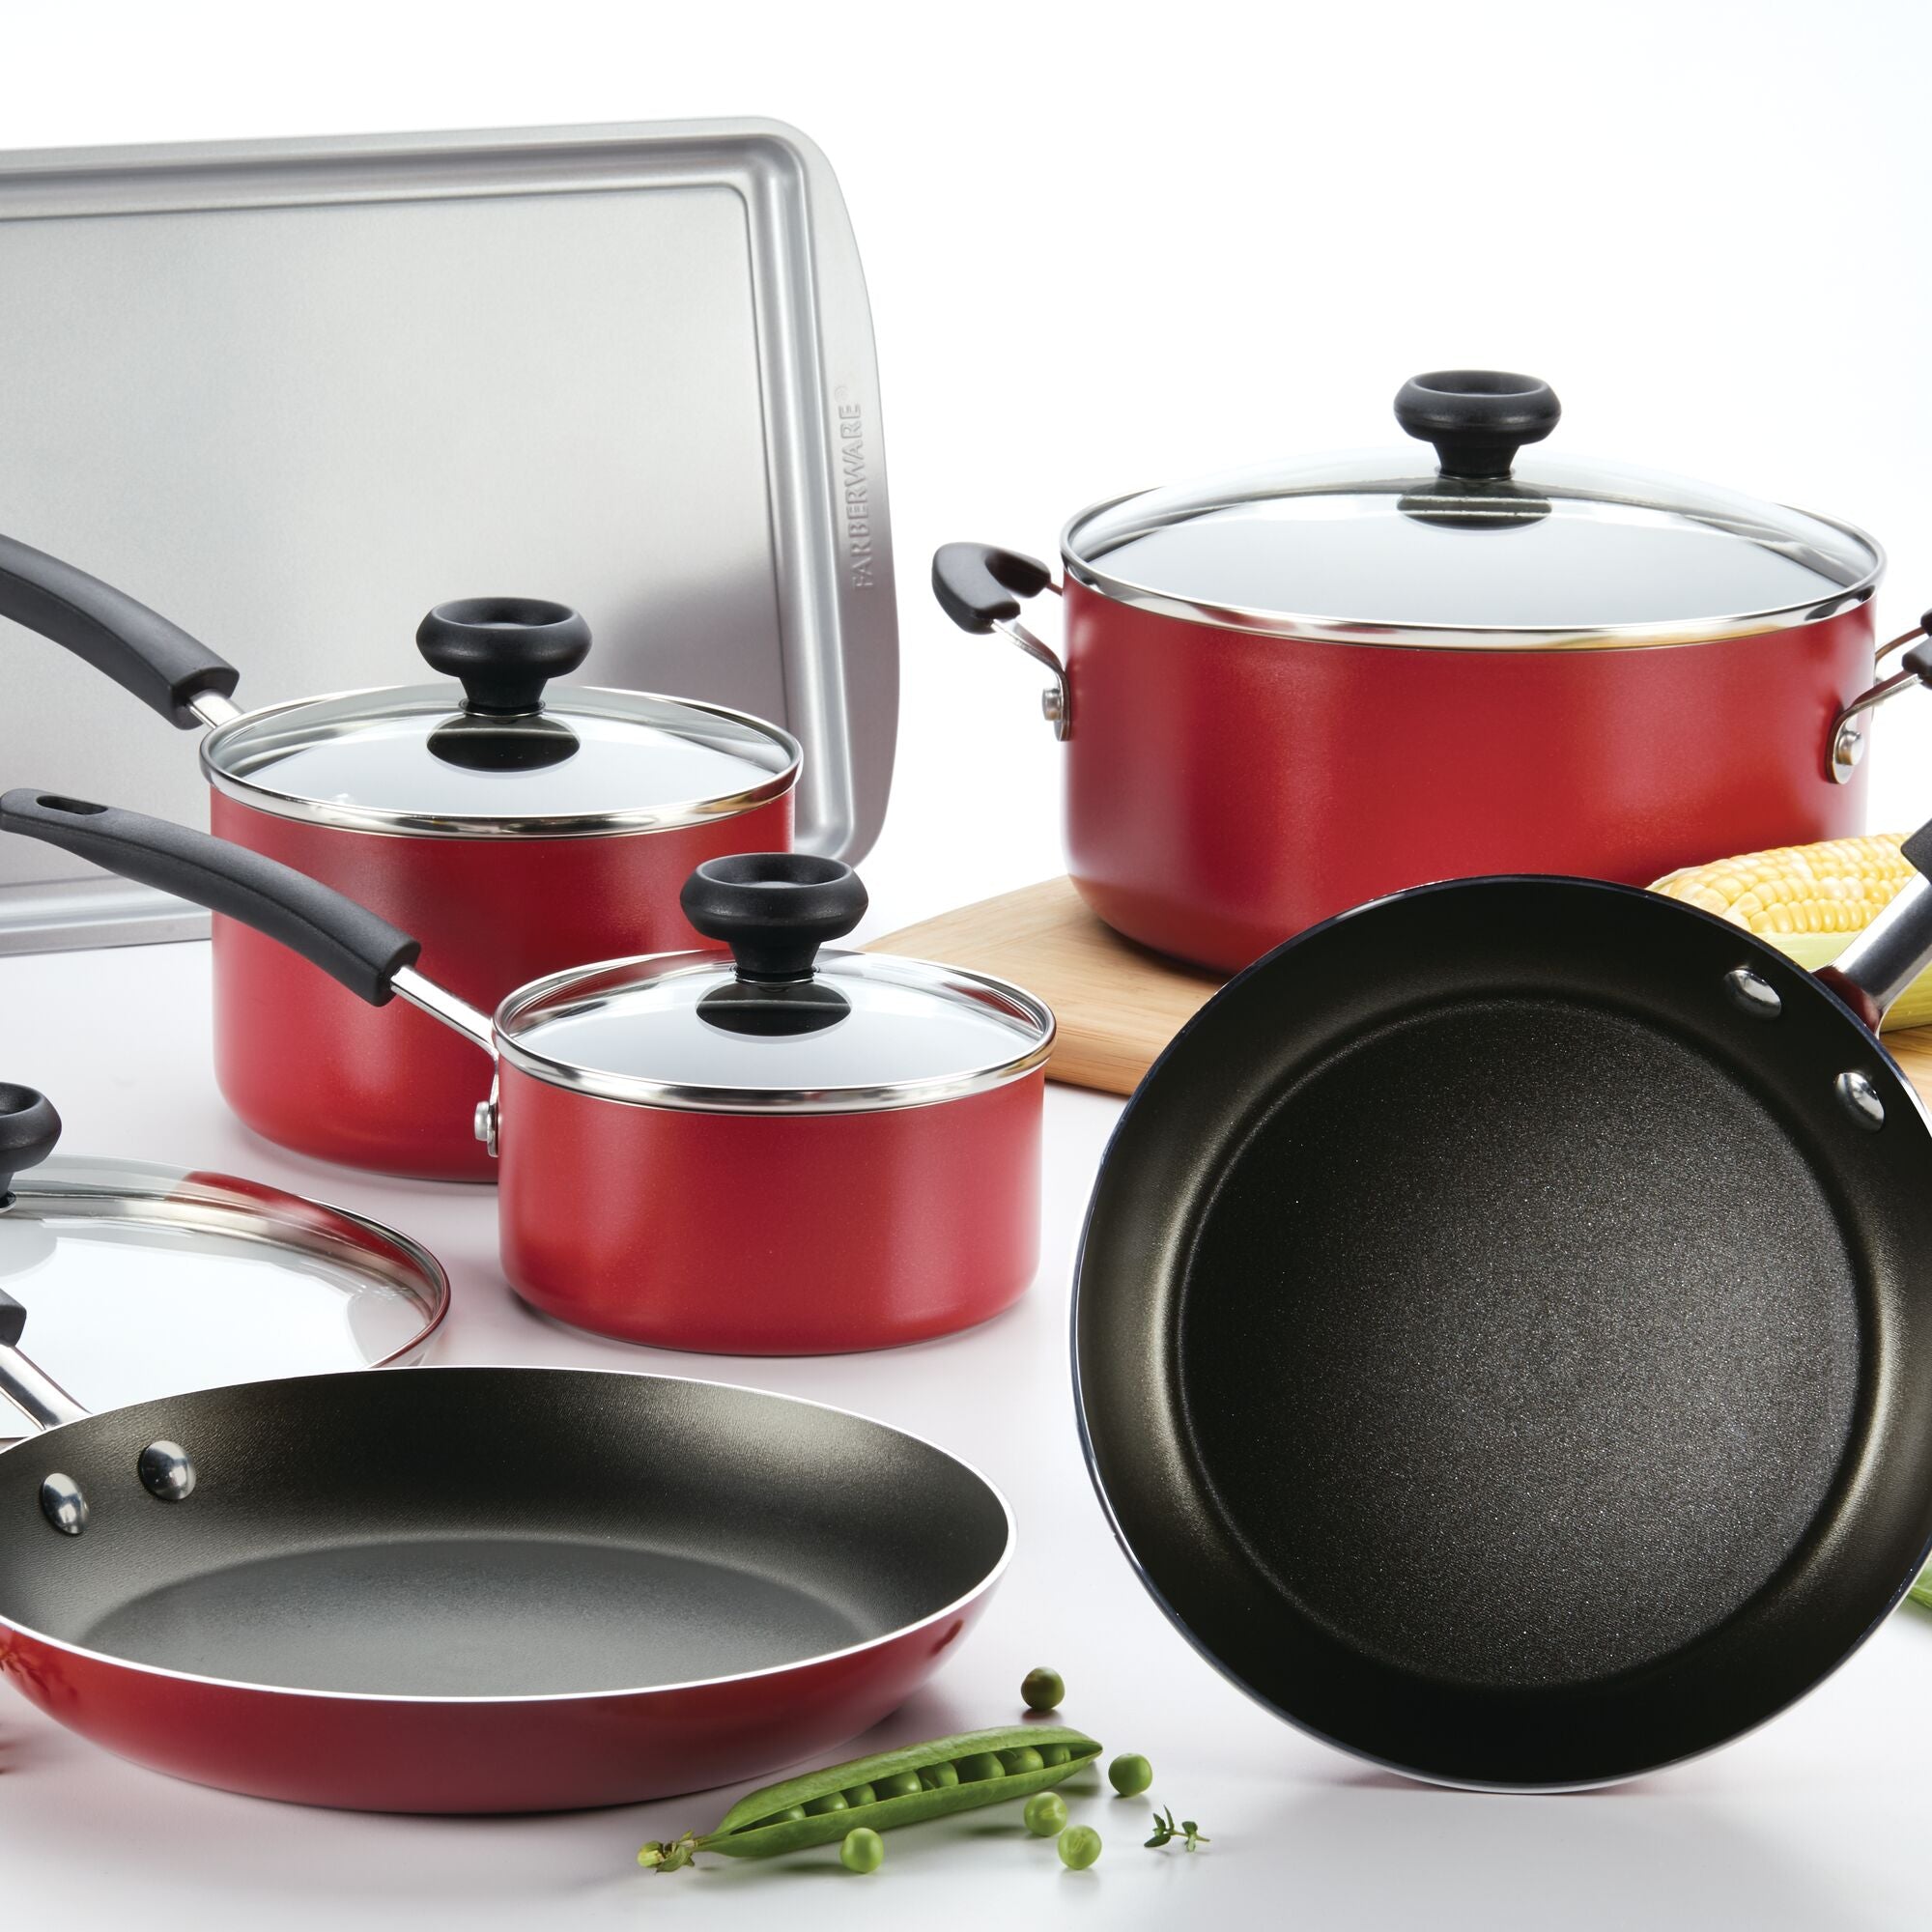 Farberware 12-Piece Easy Clean Nonstick Pots and Pans Set, Cookware Set, Red